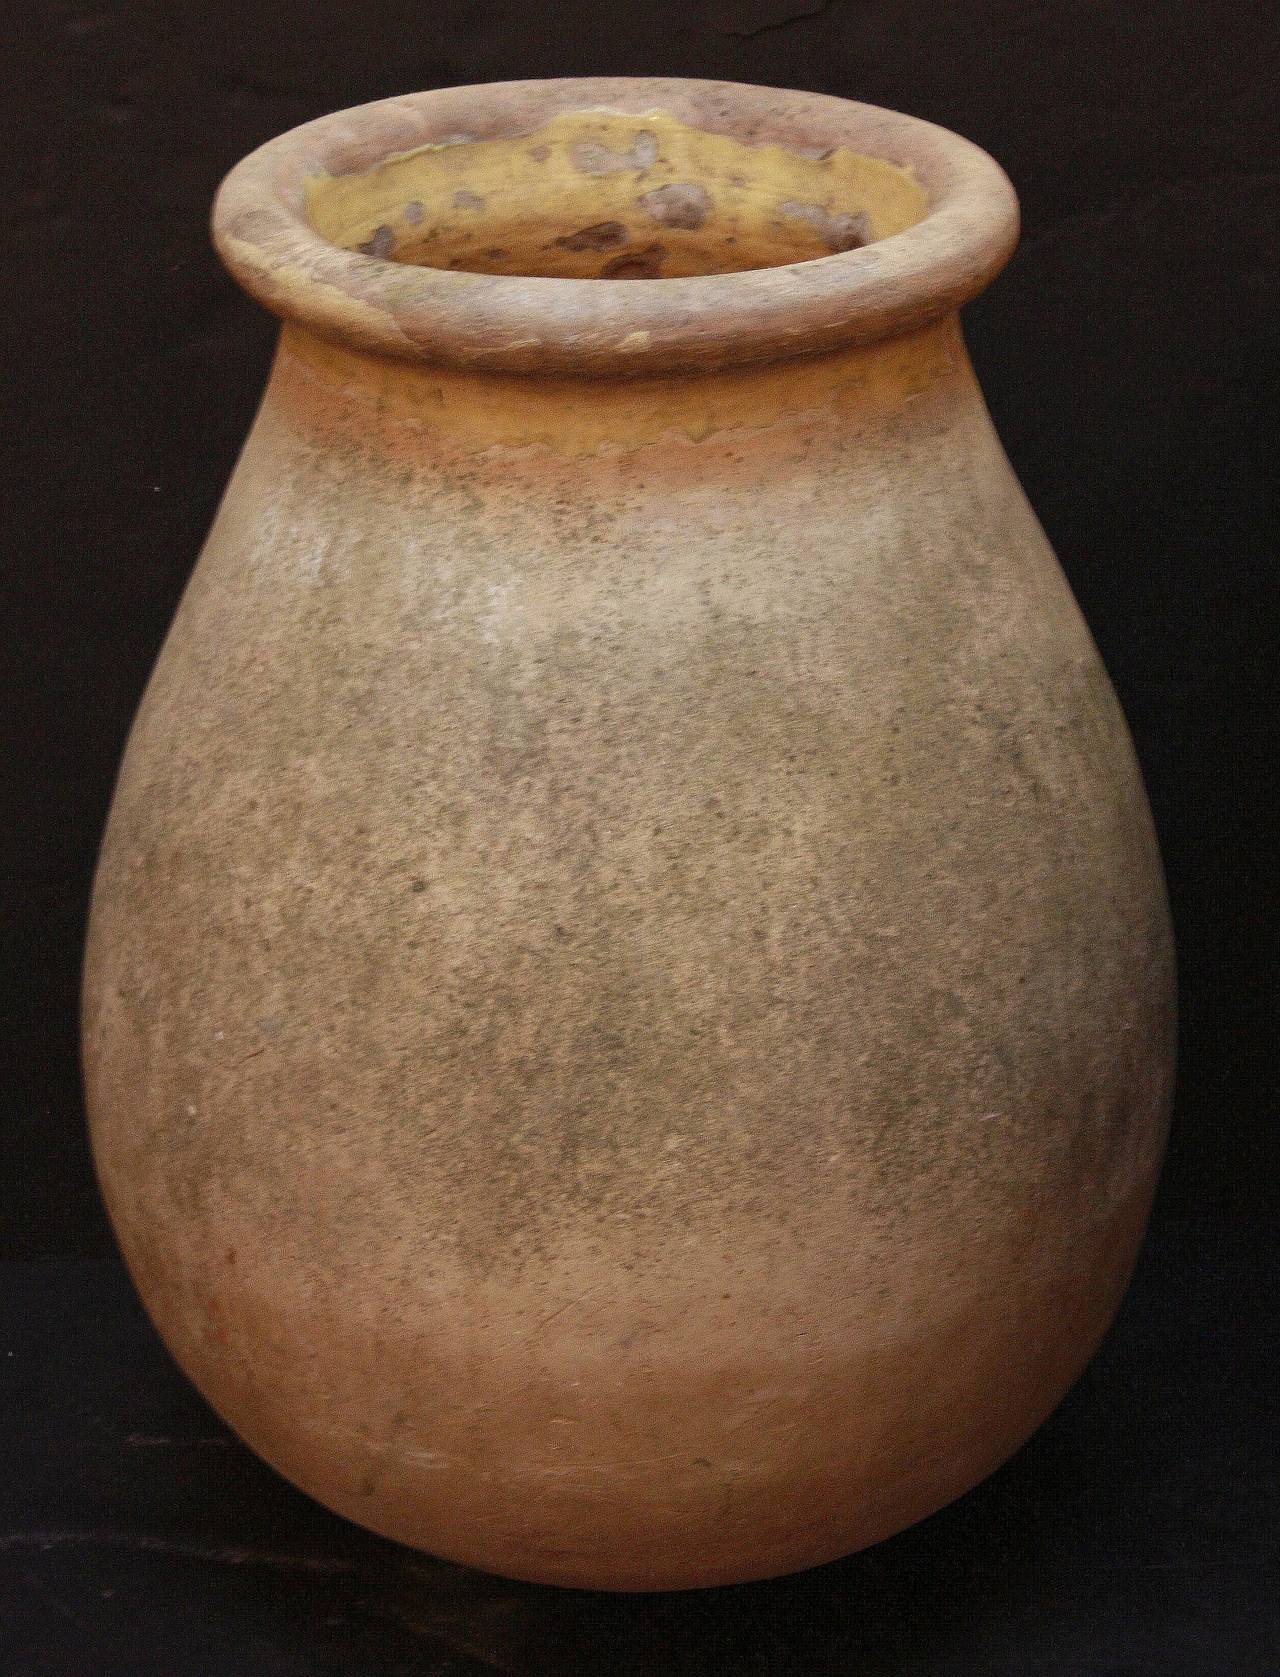 A handsome large French garden pot or oil jar from the Biot, Alpes-Maritimes, region - known as a pottery center from the 18th c. onward. 
Featuring a glazed rolled-edge top over a smooth, cylindrical body and functional as a garden ornament,